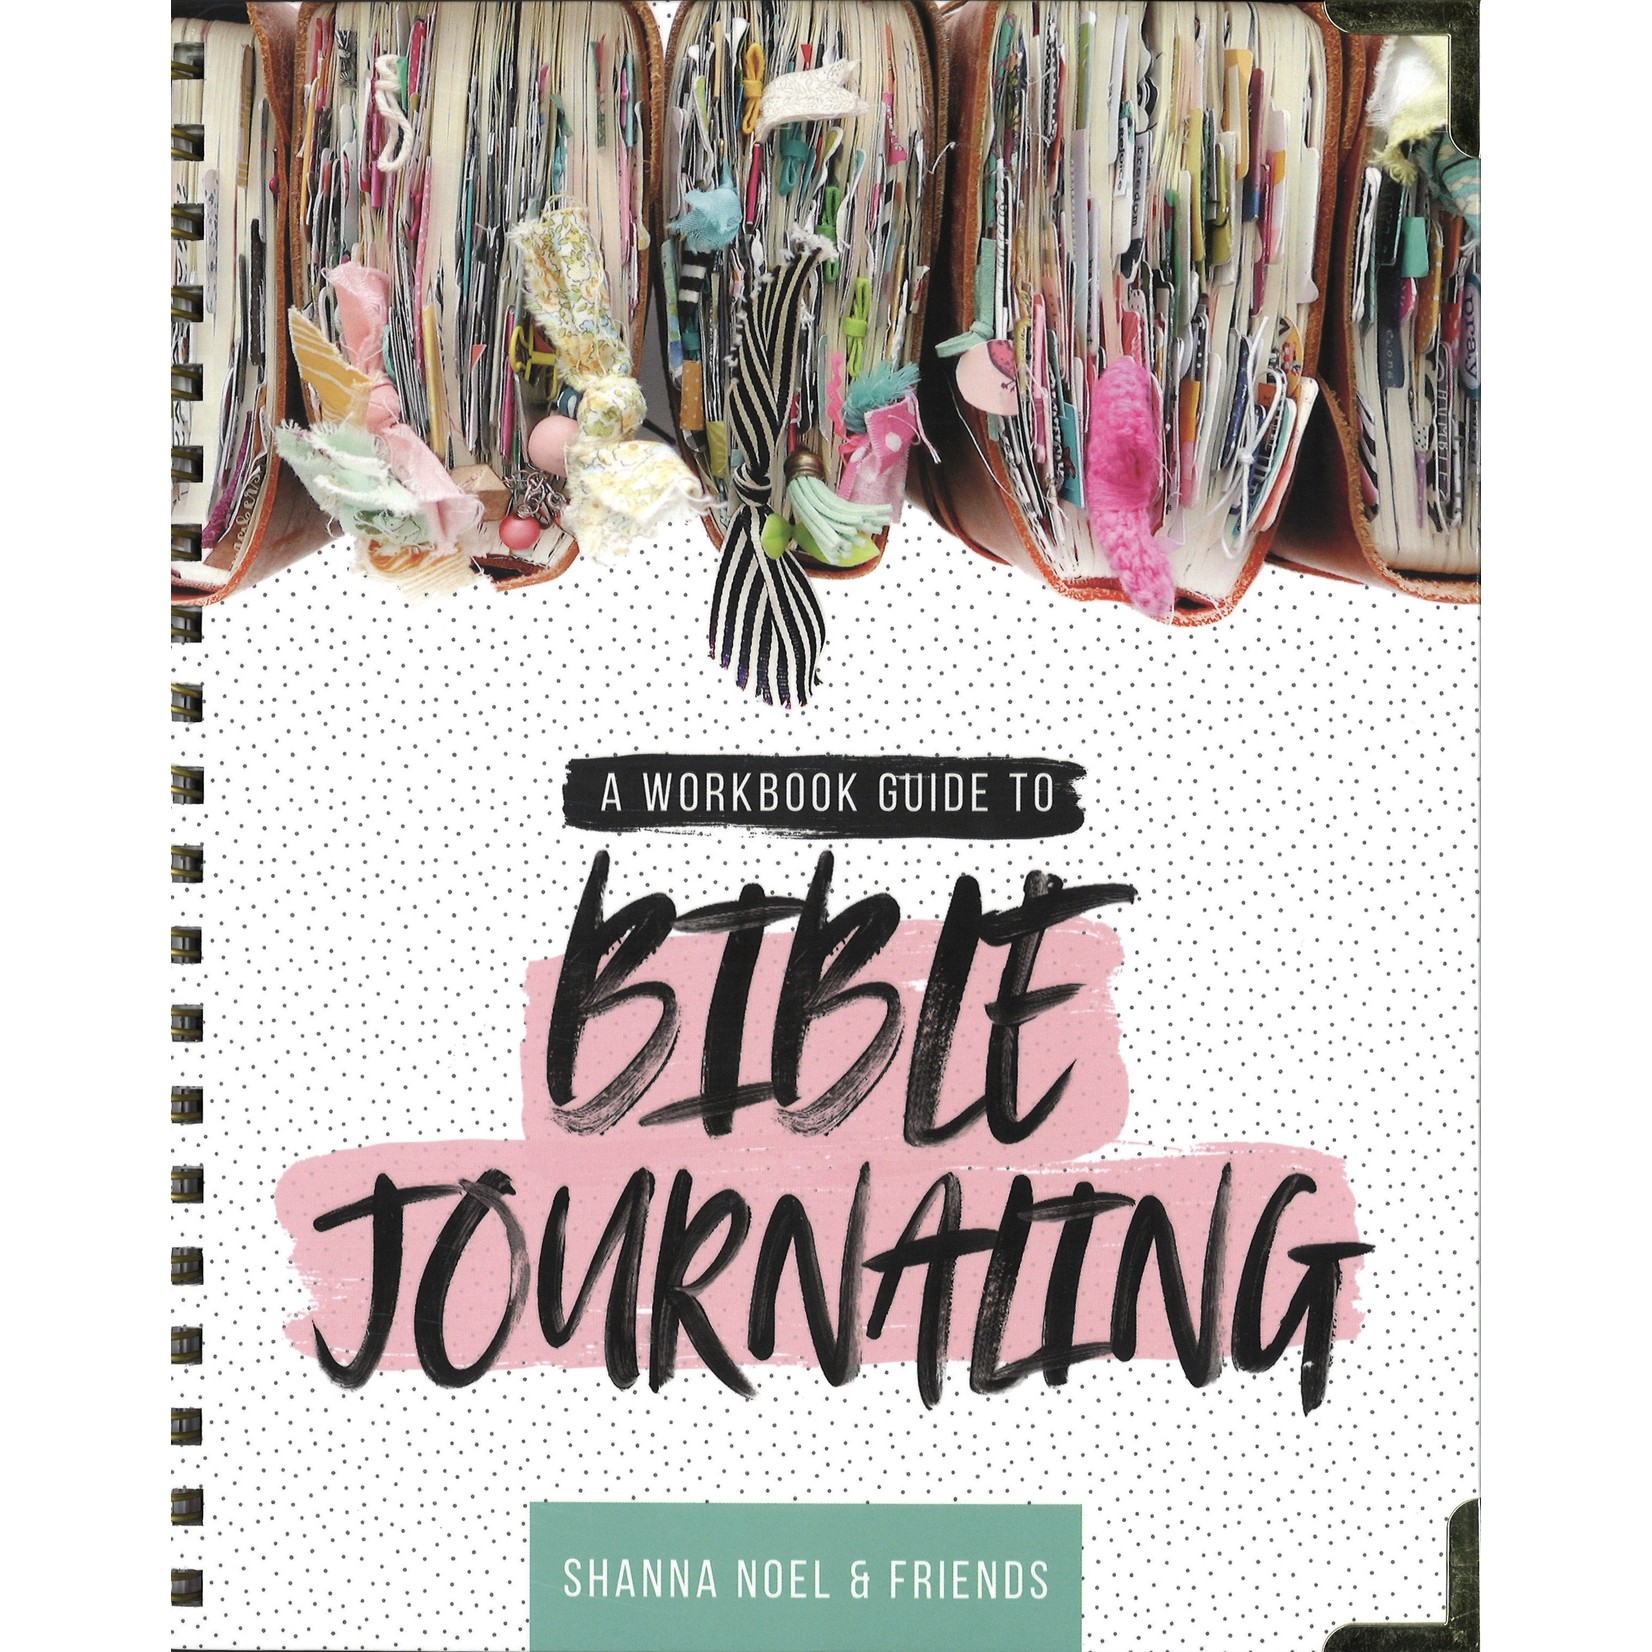 A WORKBOOK GUIDE TO BIBLE JOURNALING